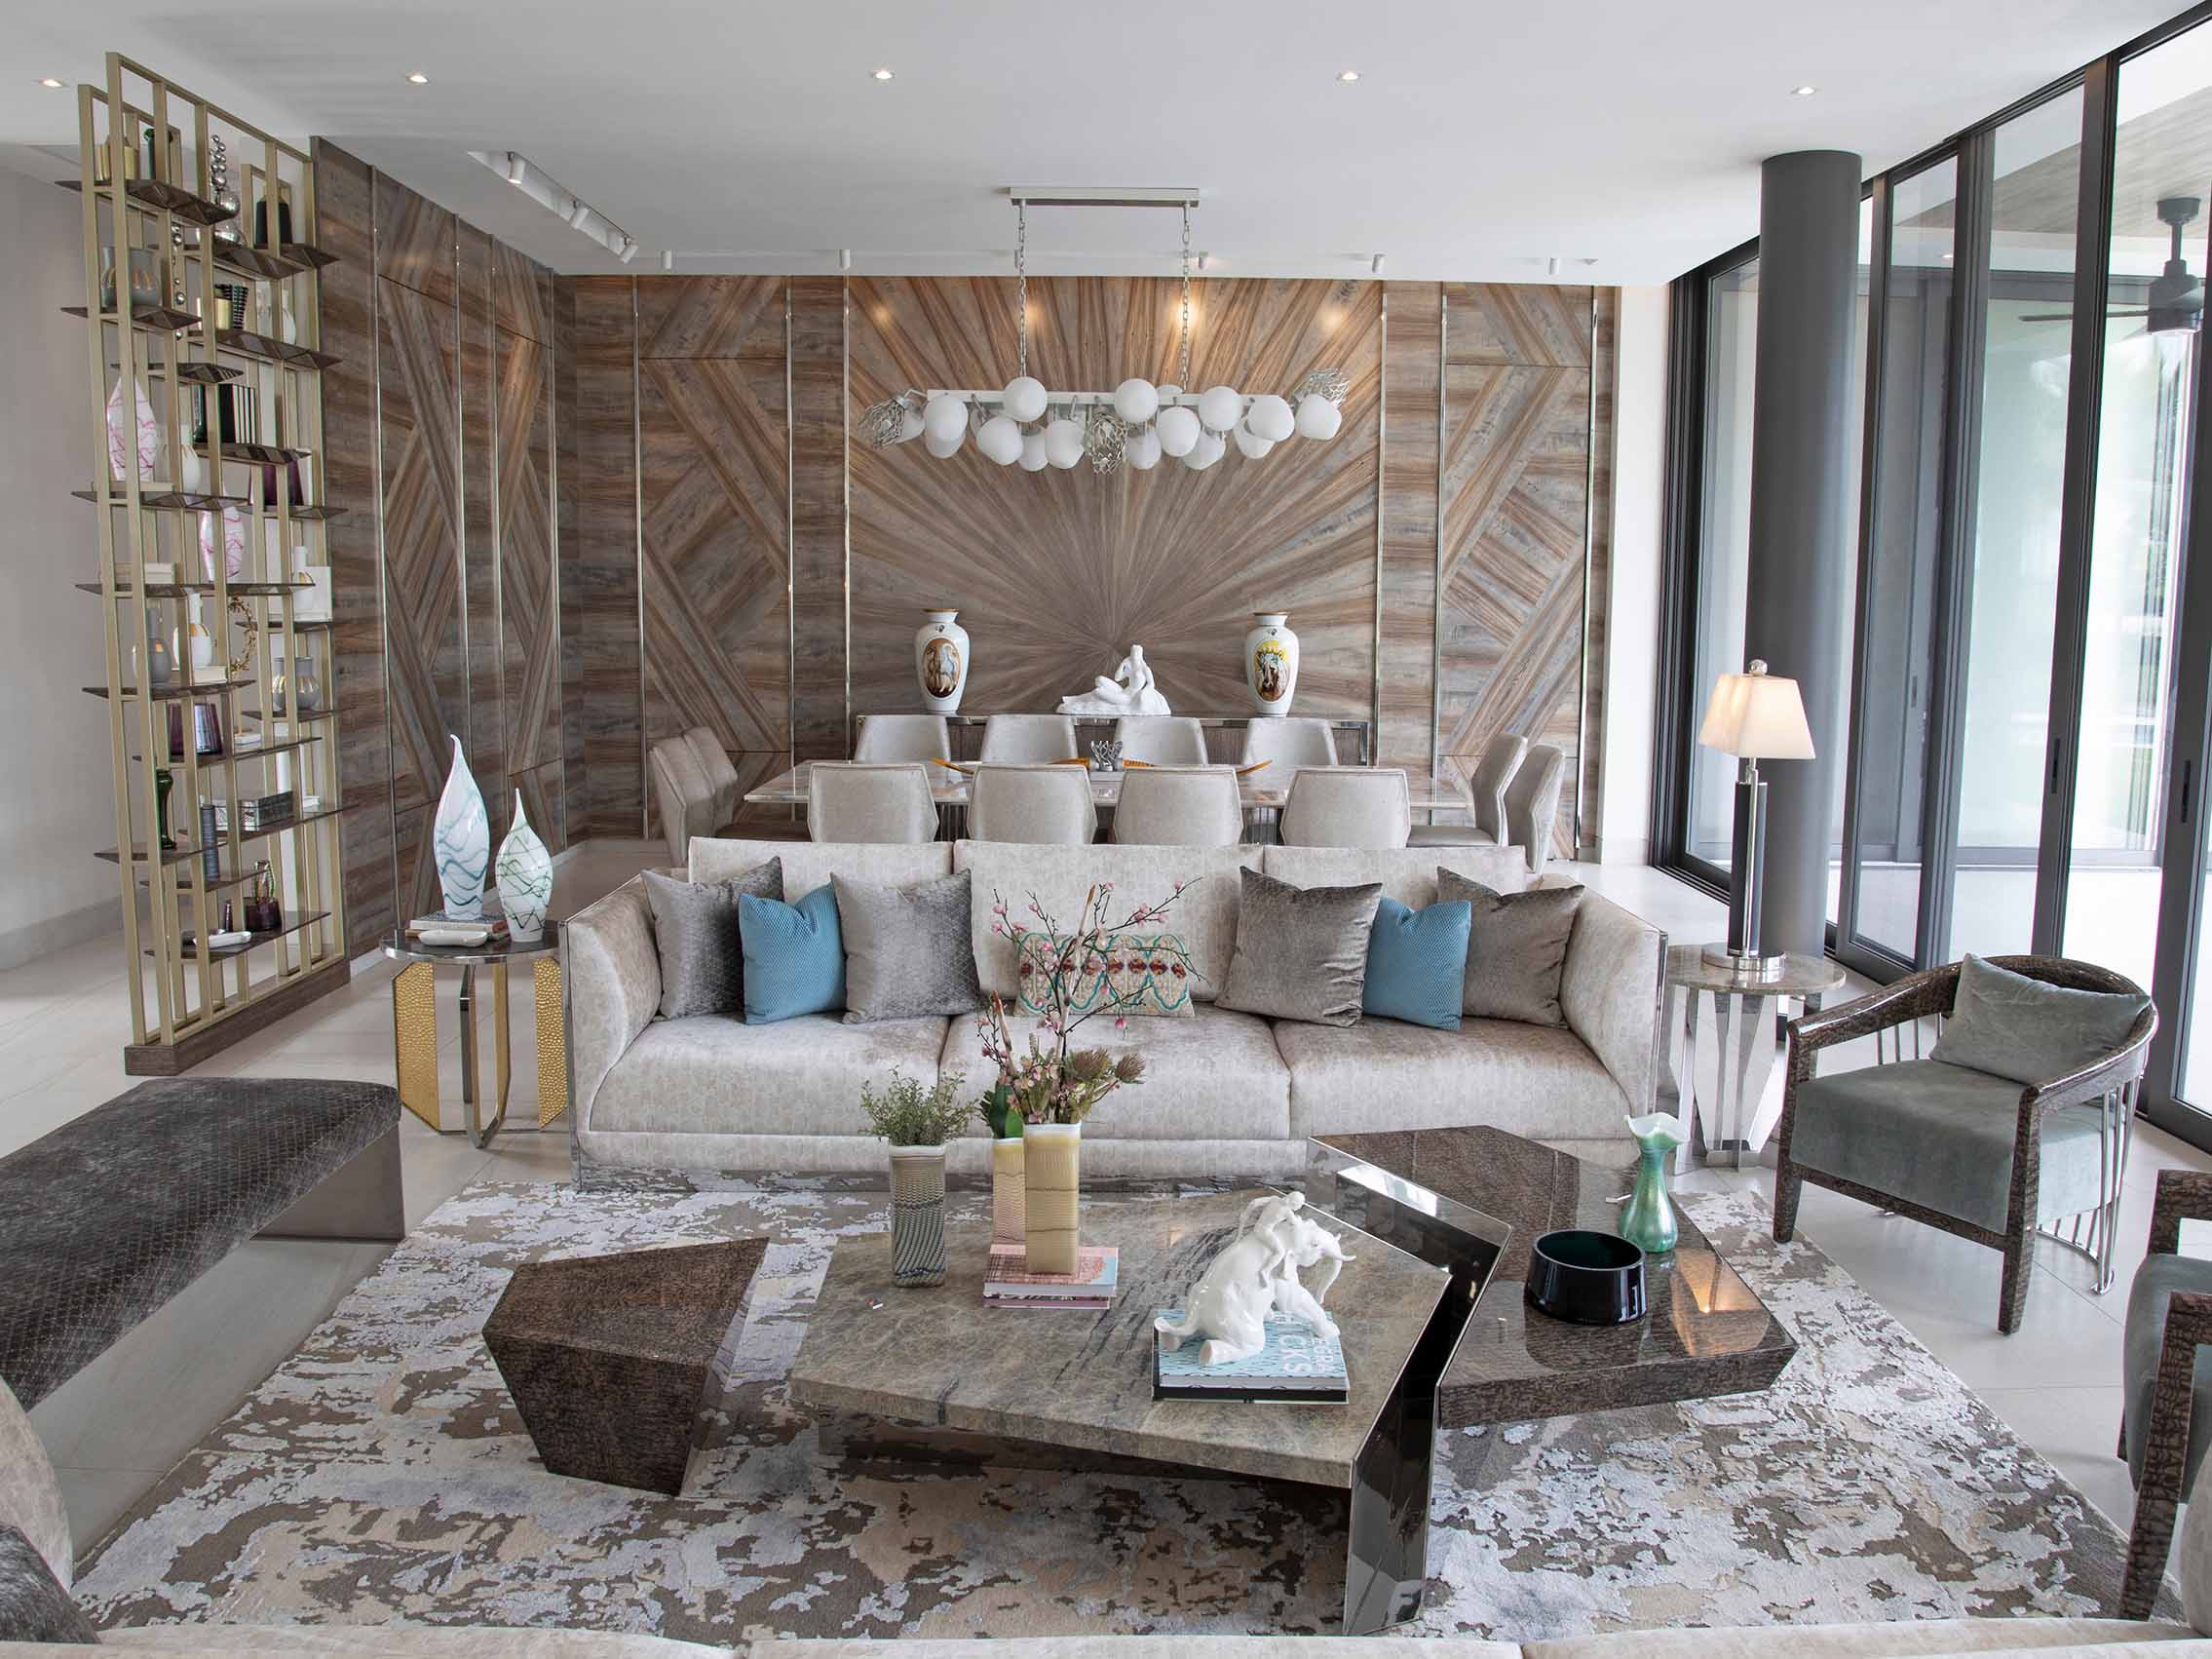 Transform Your Home with Luxury Wall Panelings